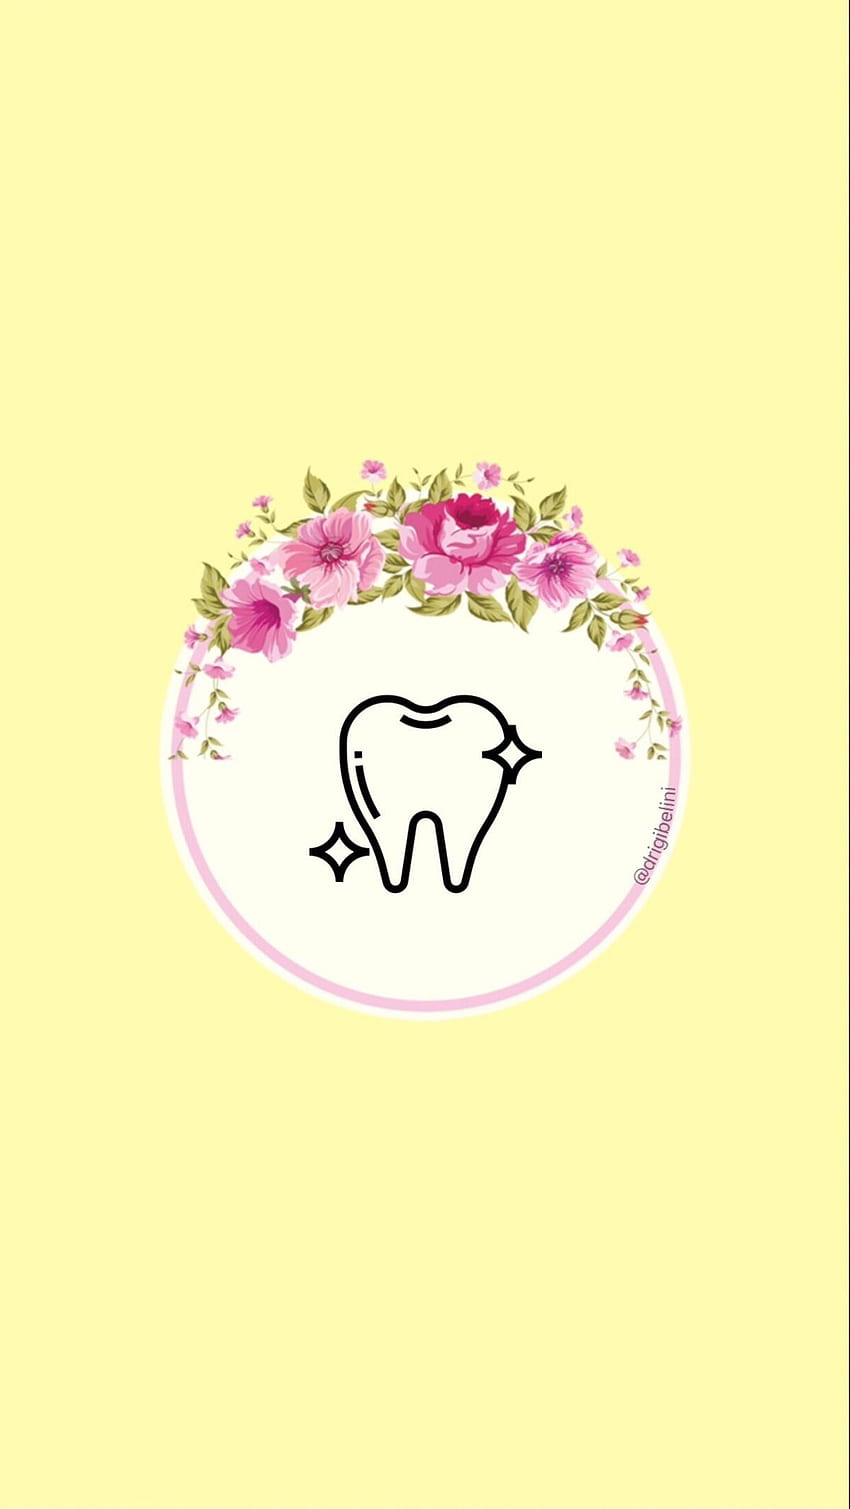 A tooth with flowers on it - Dentist